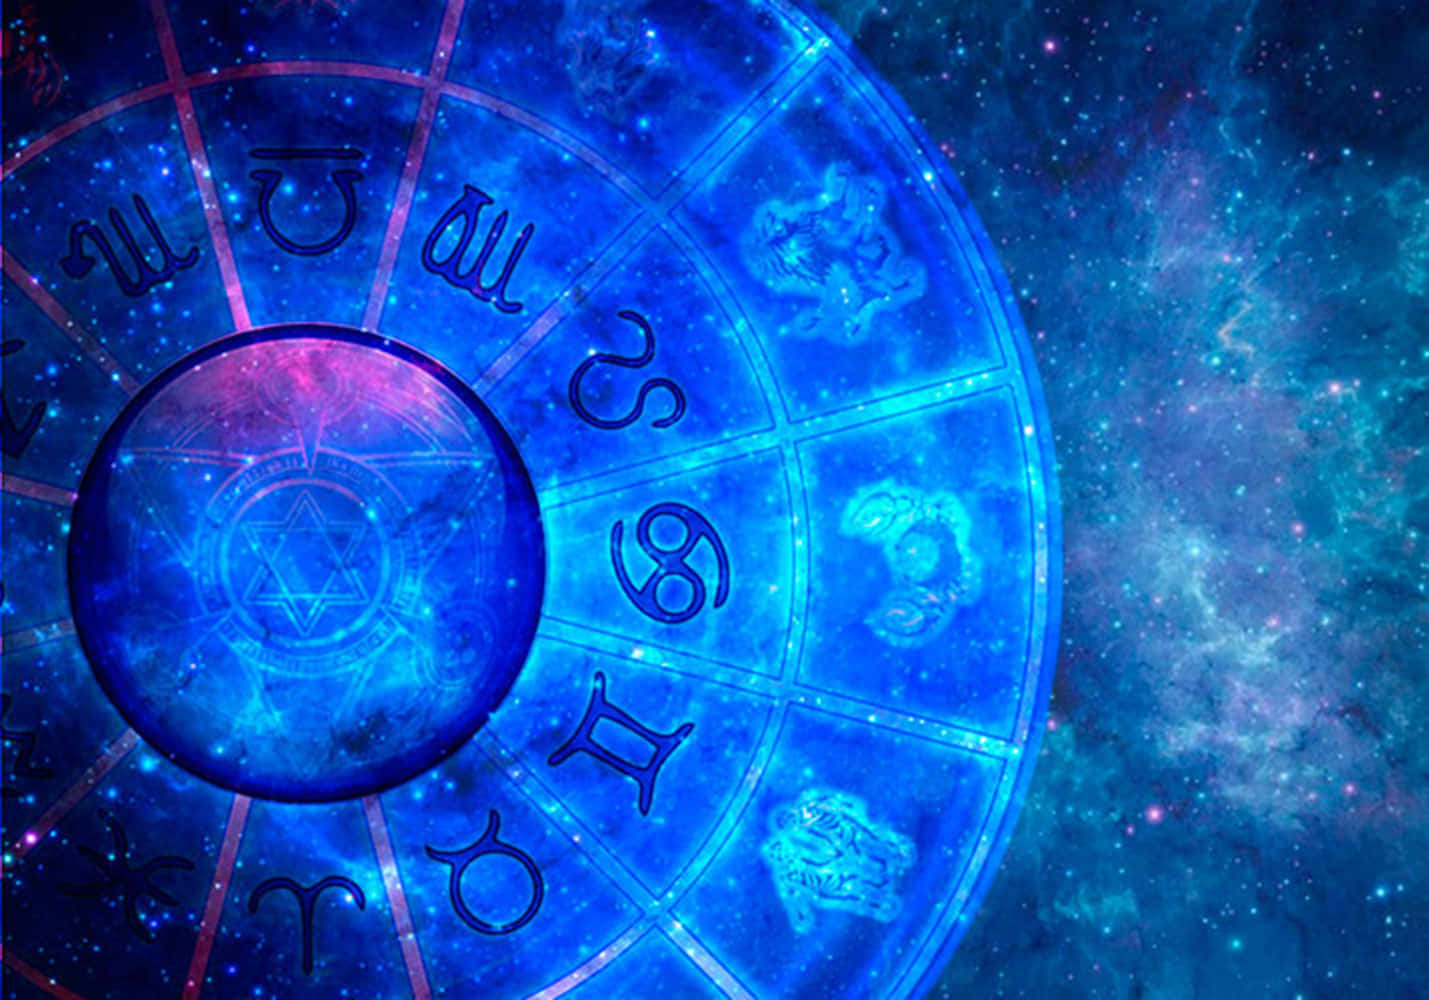 Understanding the Meaning Behind the 12 Zodiac Signs